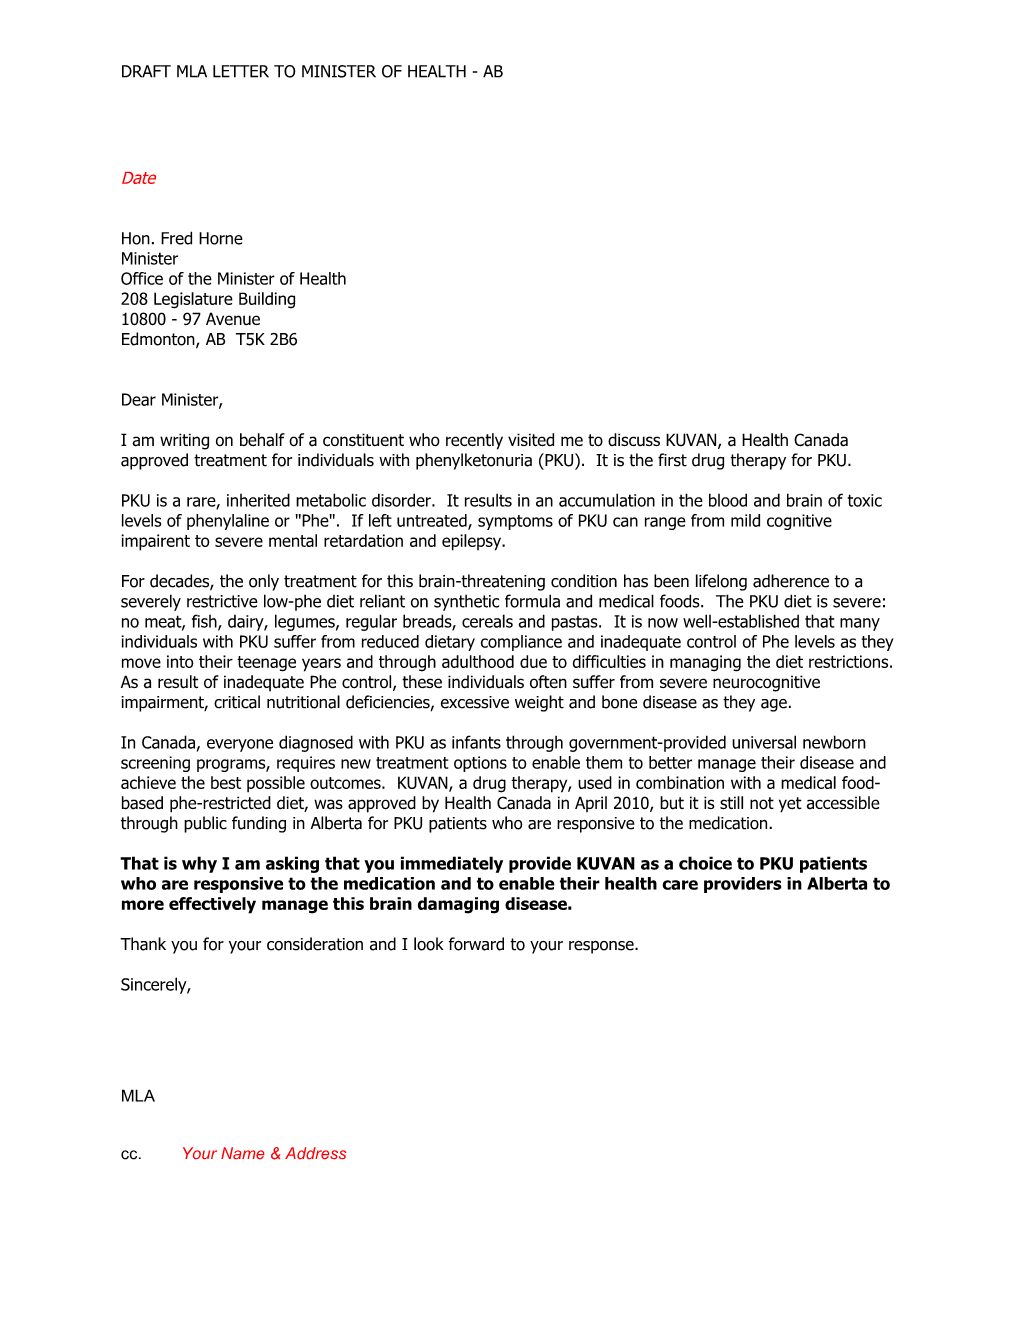 Draft Mla Letter to Minister of Health - Ab